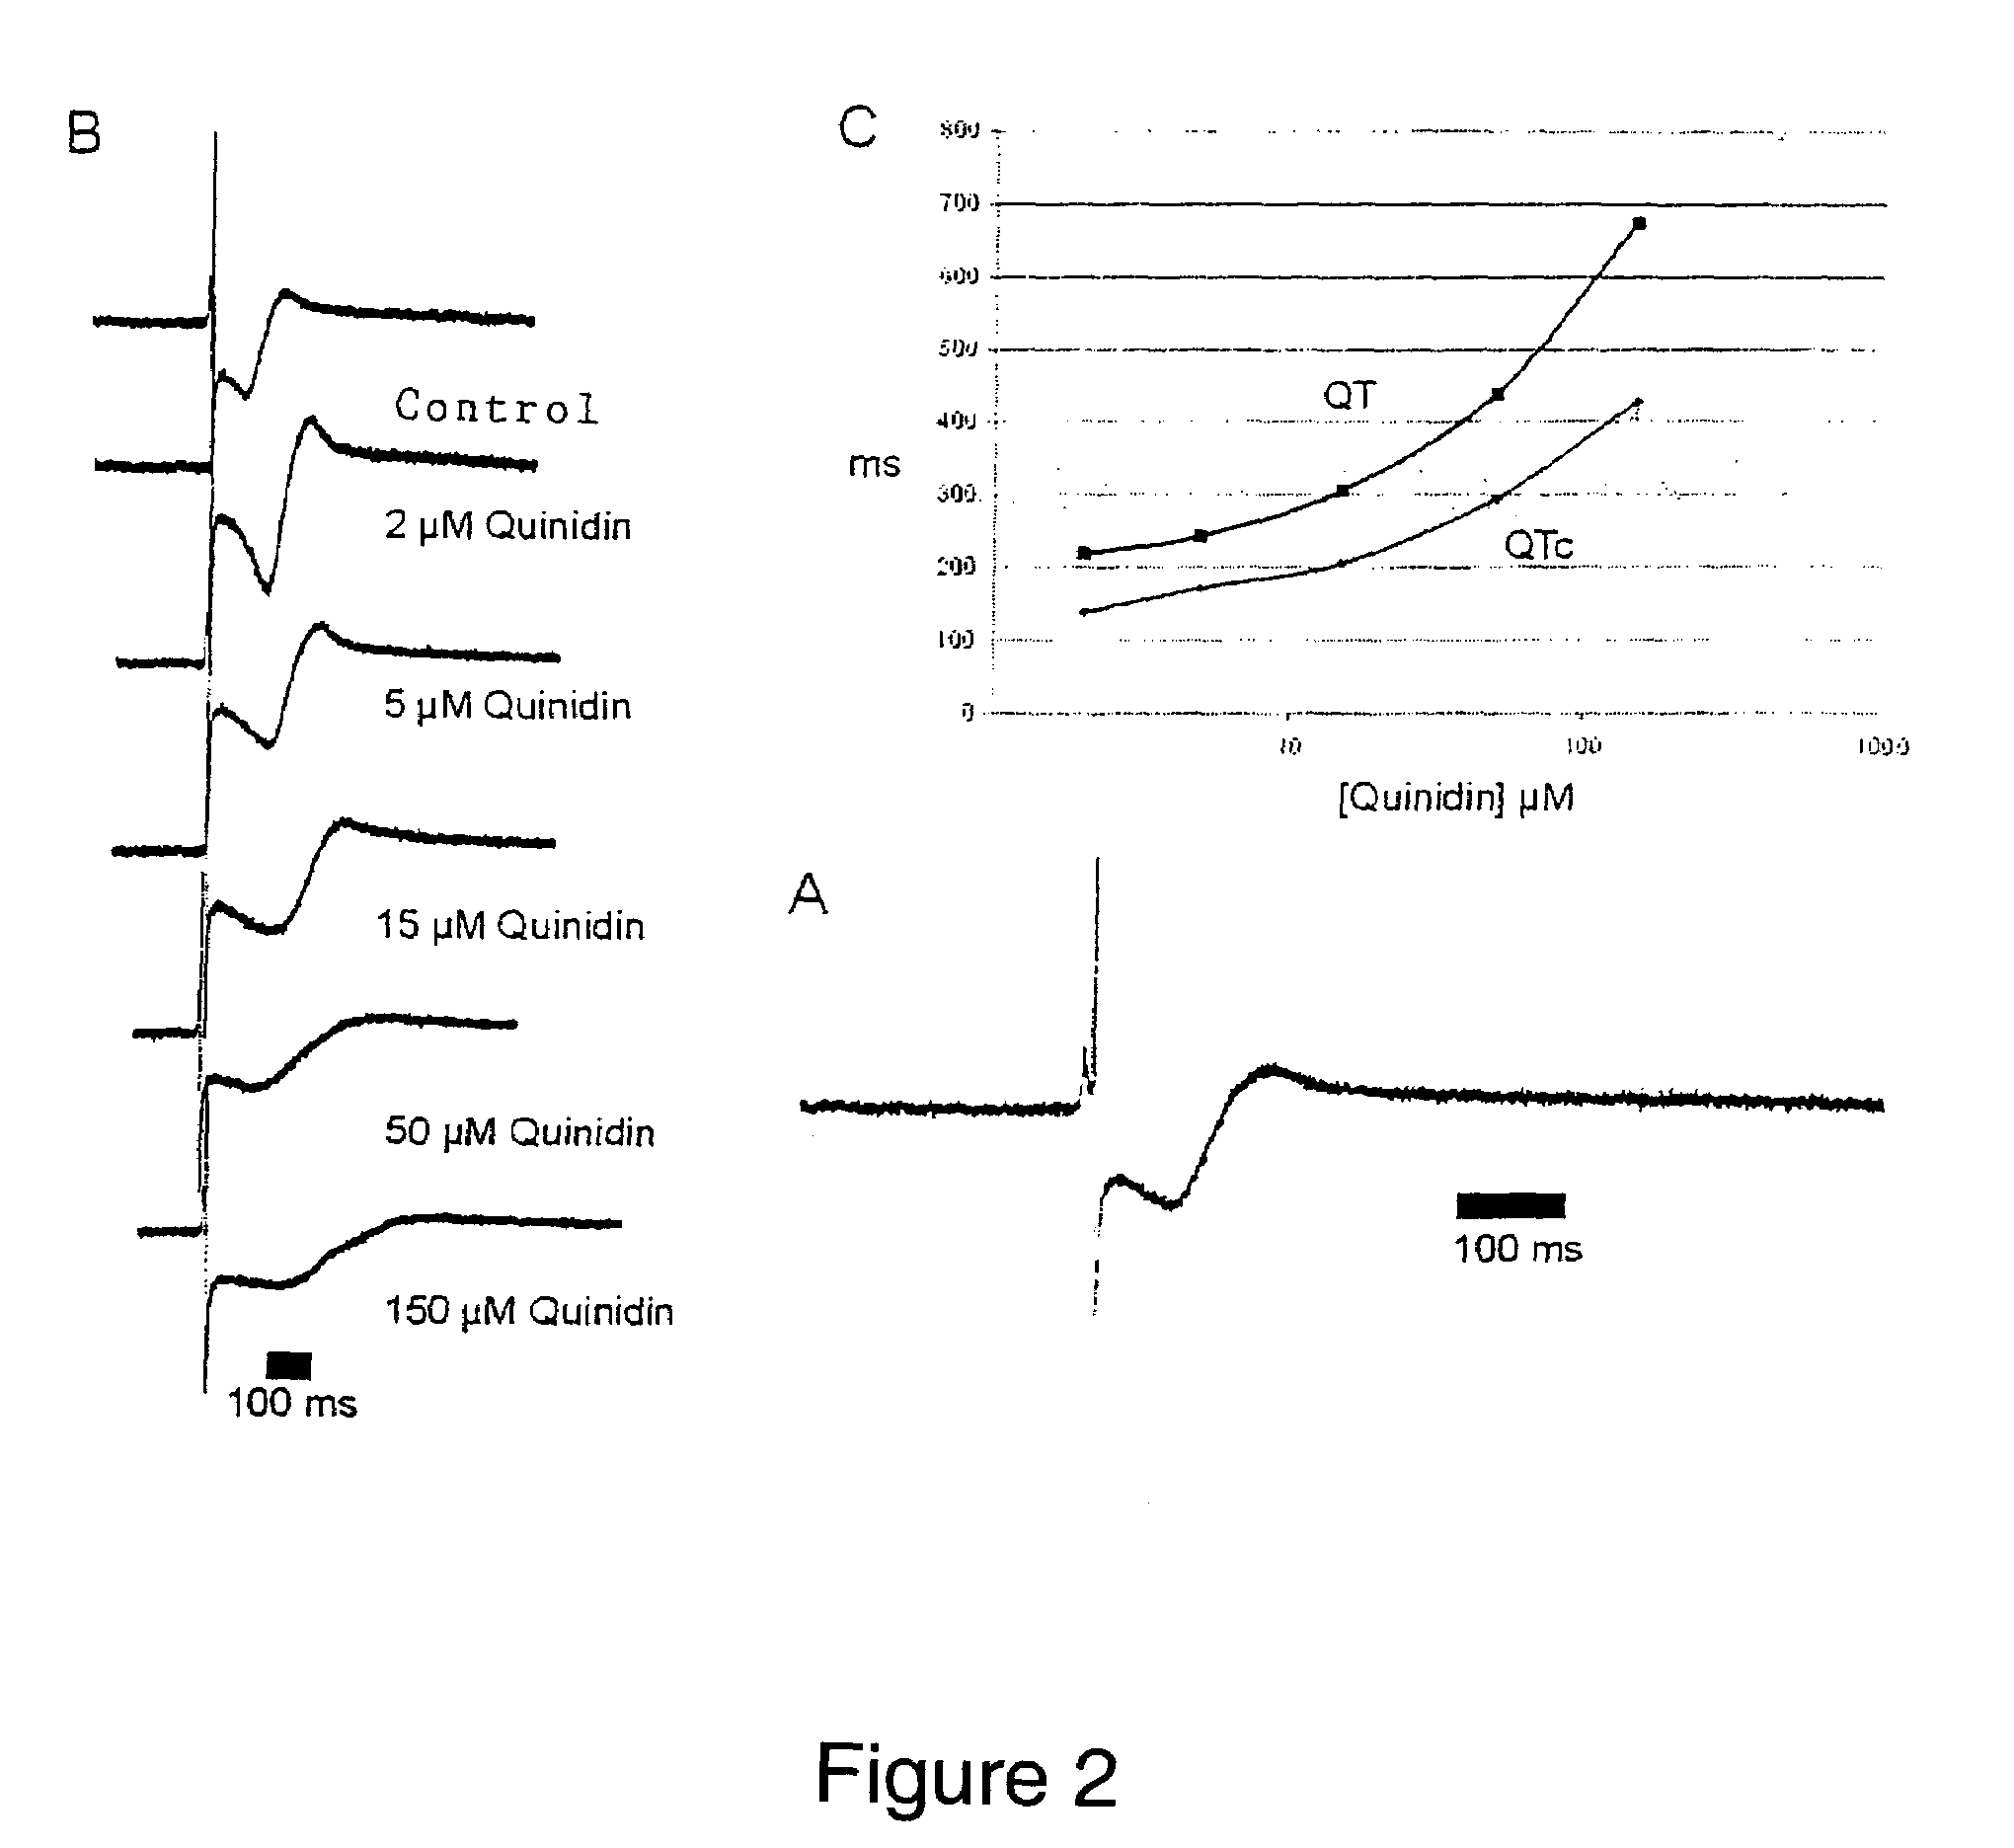 Method for determining the influence of a test substance on the heart activity of a vertebrate